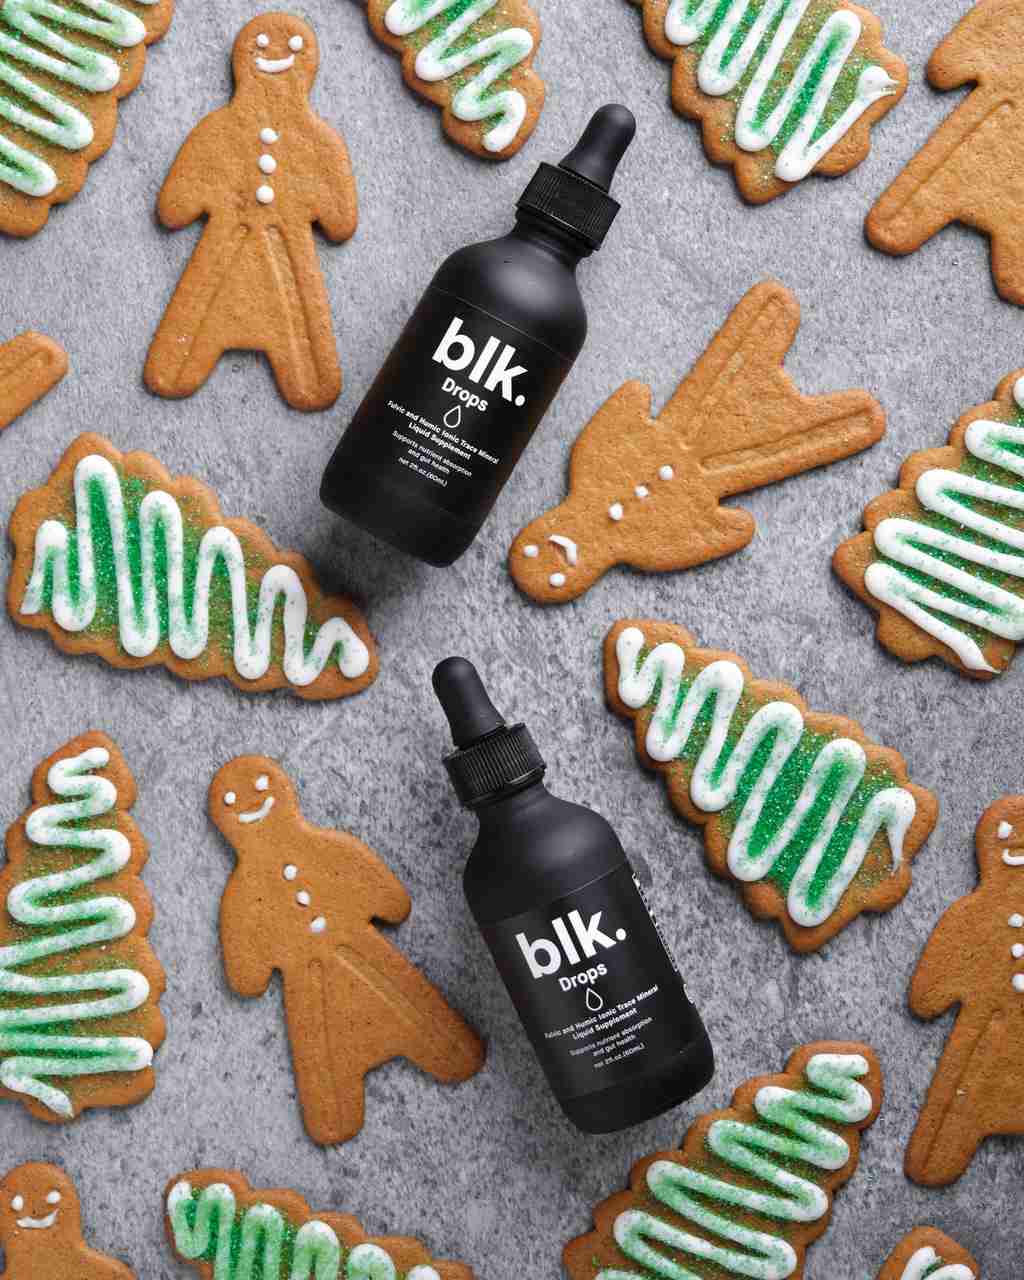 Festive Gingerbread Cookie Recipe made with blk. Drops